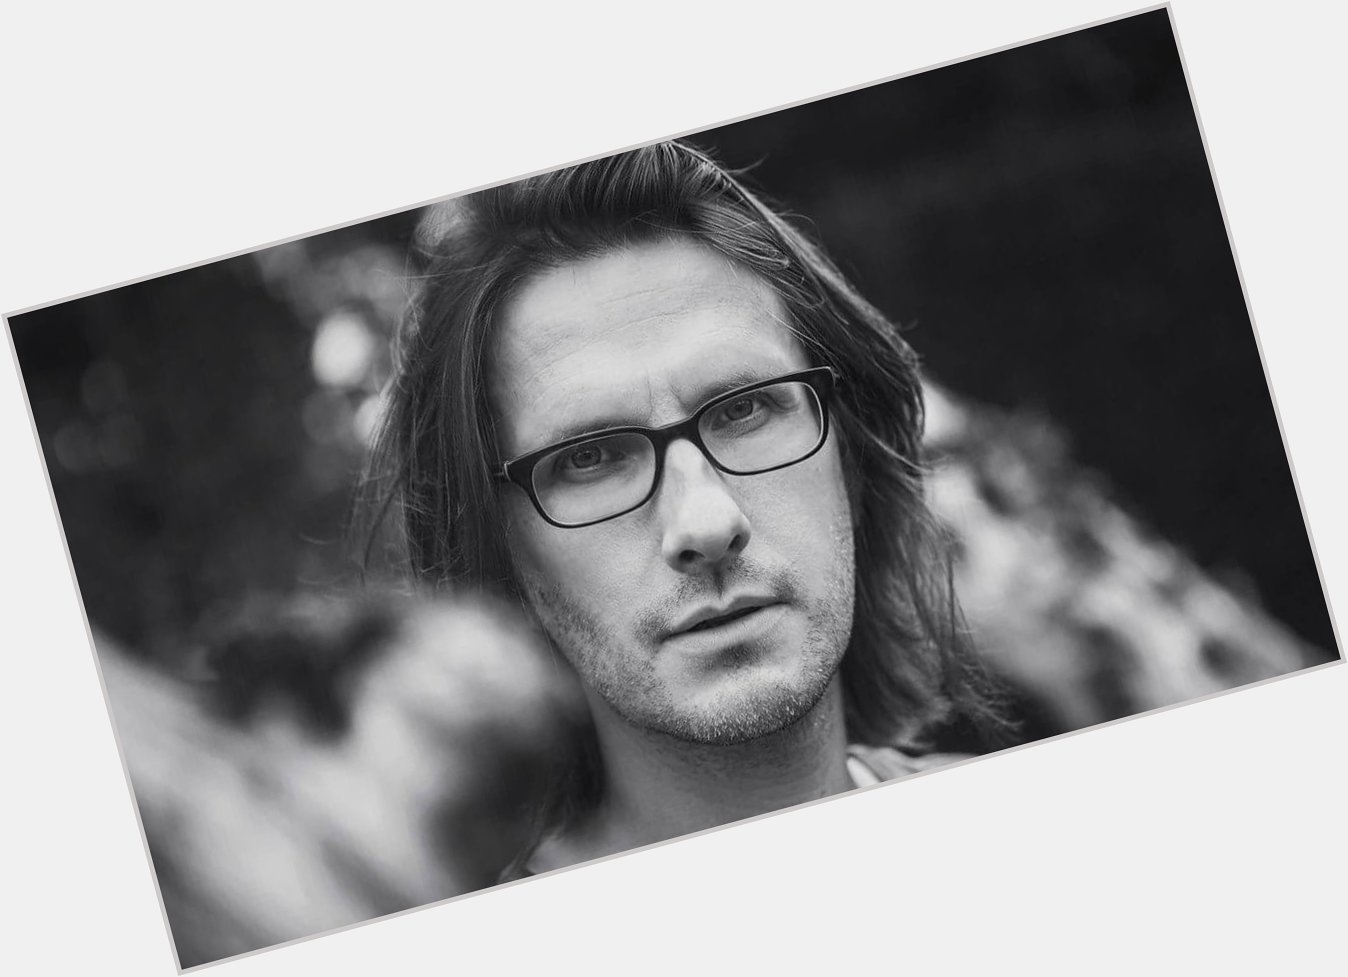 Happy Birthday to Steven Wilson! One of the most influential and creative artists in prog music. Hail master !!! 